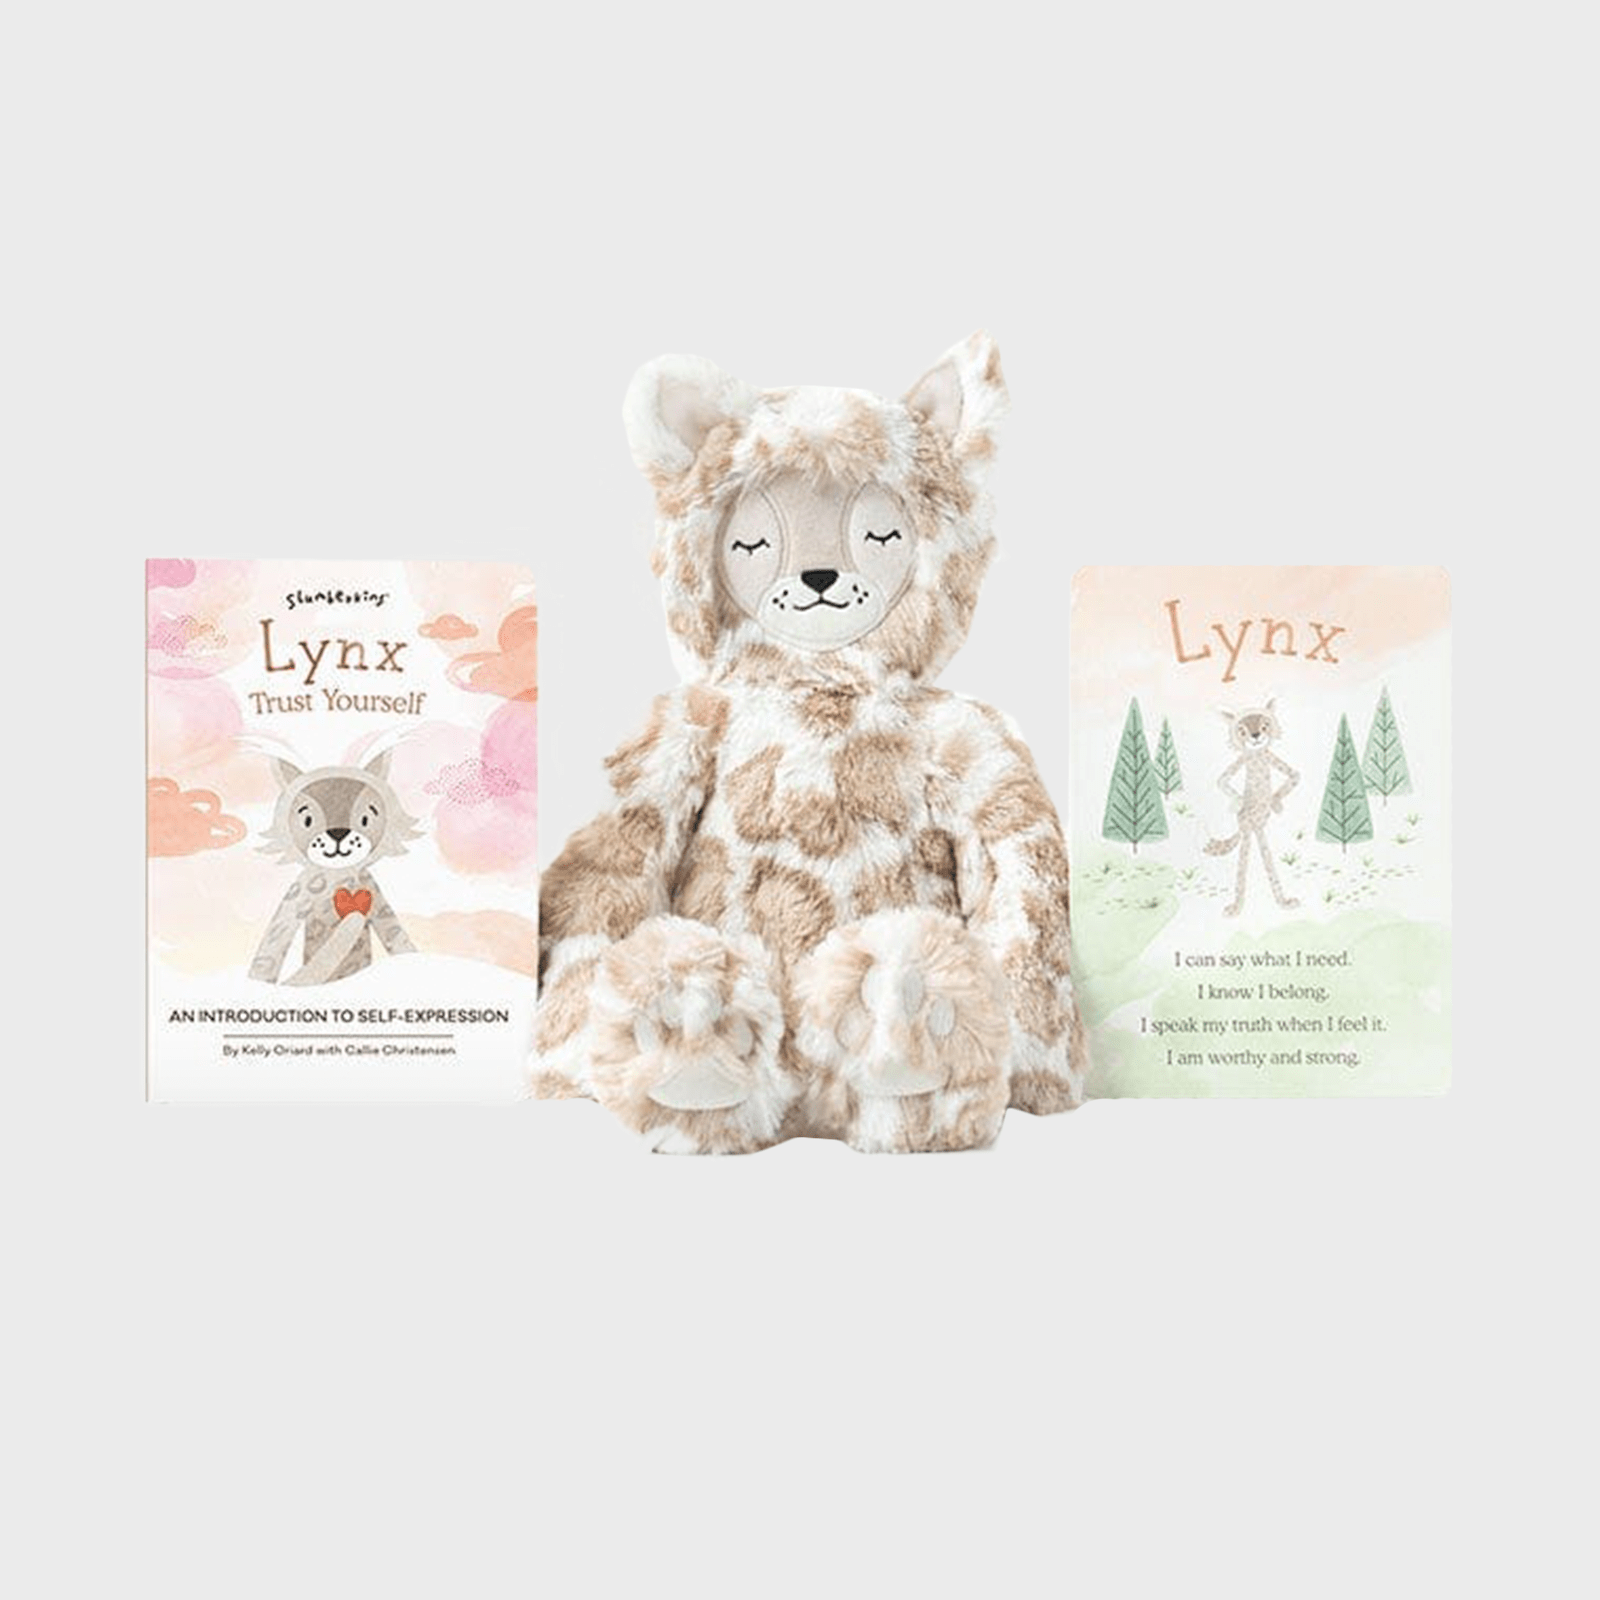 <p>Foster your little one's emotional growth with this purposeful <a href="https://slumberkins.com/collections/all-topics/products/lynx-kin" rel="noopener noreferrer">book and stuffed animal</a>. This set, which was created by a therapist and special education teacher, teaches your little girl that her voice matters. For more meaningful gifts for girls, here are more <a href="https://www.rd.com/list/holiday-gifts-that-give-back/" rel="noopener noreferrer">gifts that give back</a>.</p> <p class="listicle-page__cta-button-shop"><a class="shop-btn" href="https://slumberkins.com/collections/all-topics/products/lynx-kin">Shop Now</a></p>